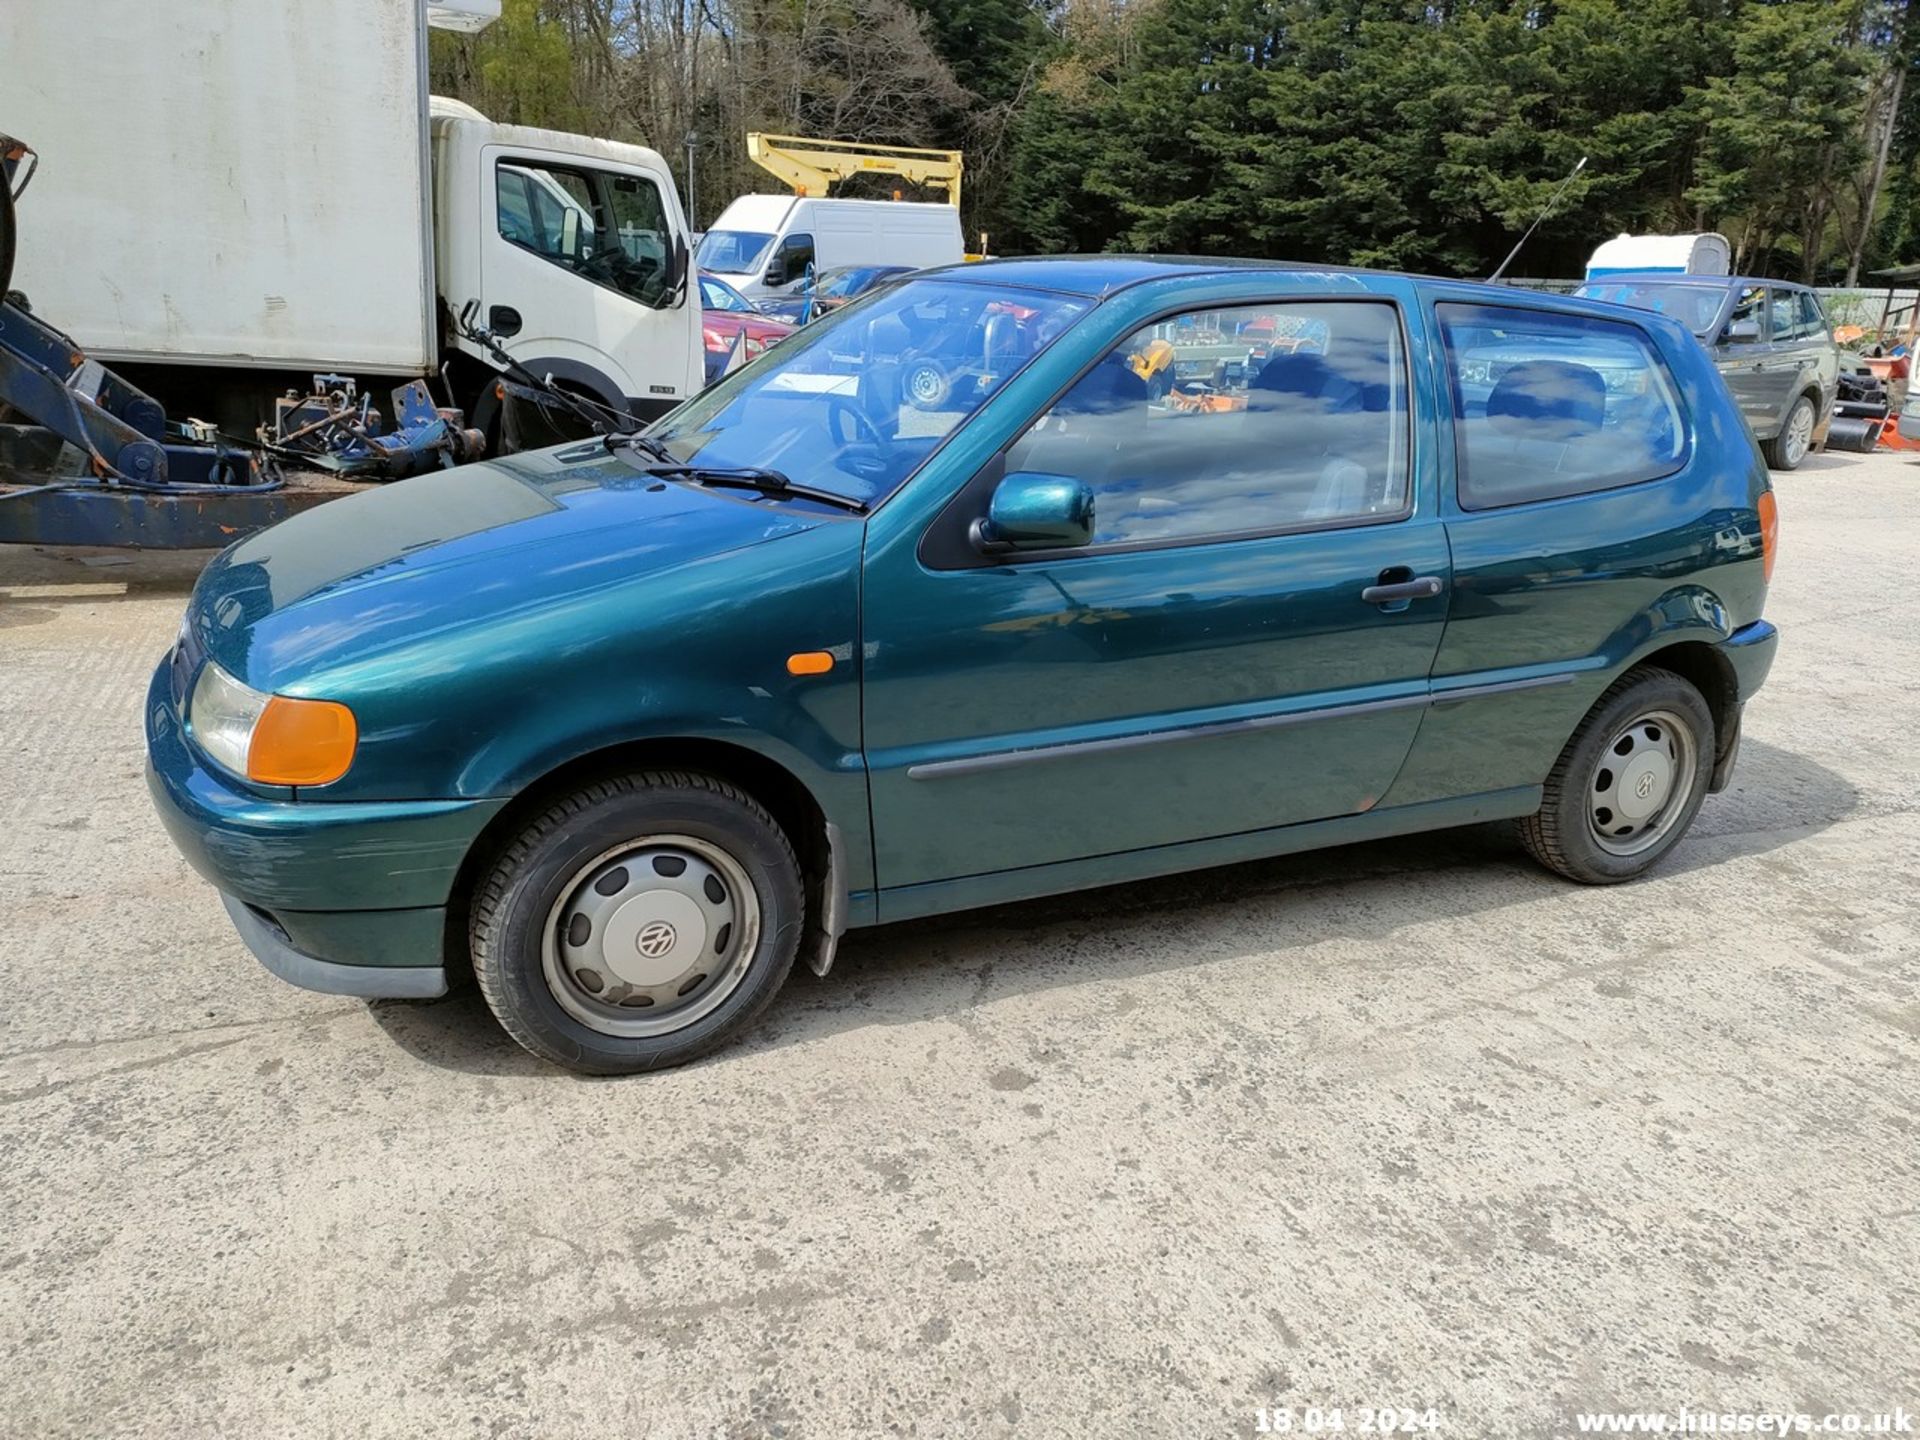 1997 VOLKSWAGEN POLO 1.4 CL AUTO - 1390cc 3dr Hatchback (Green, 68k) - Image 17 of 60